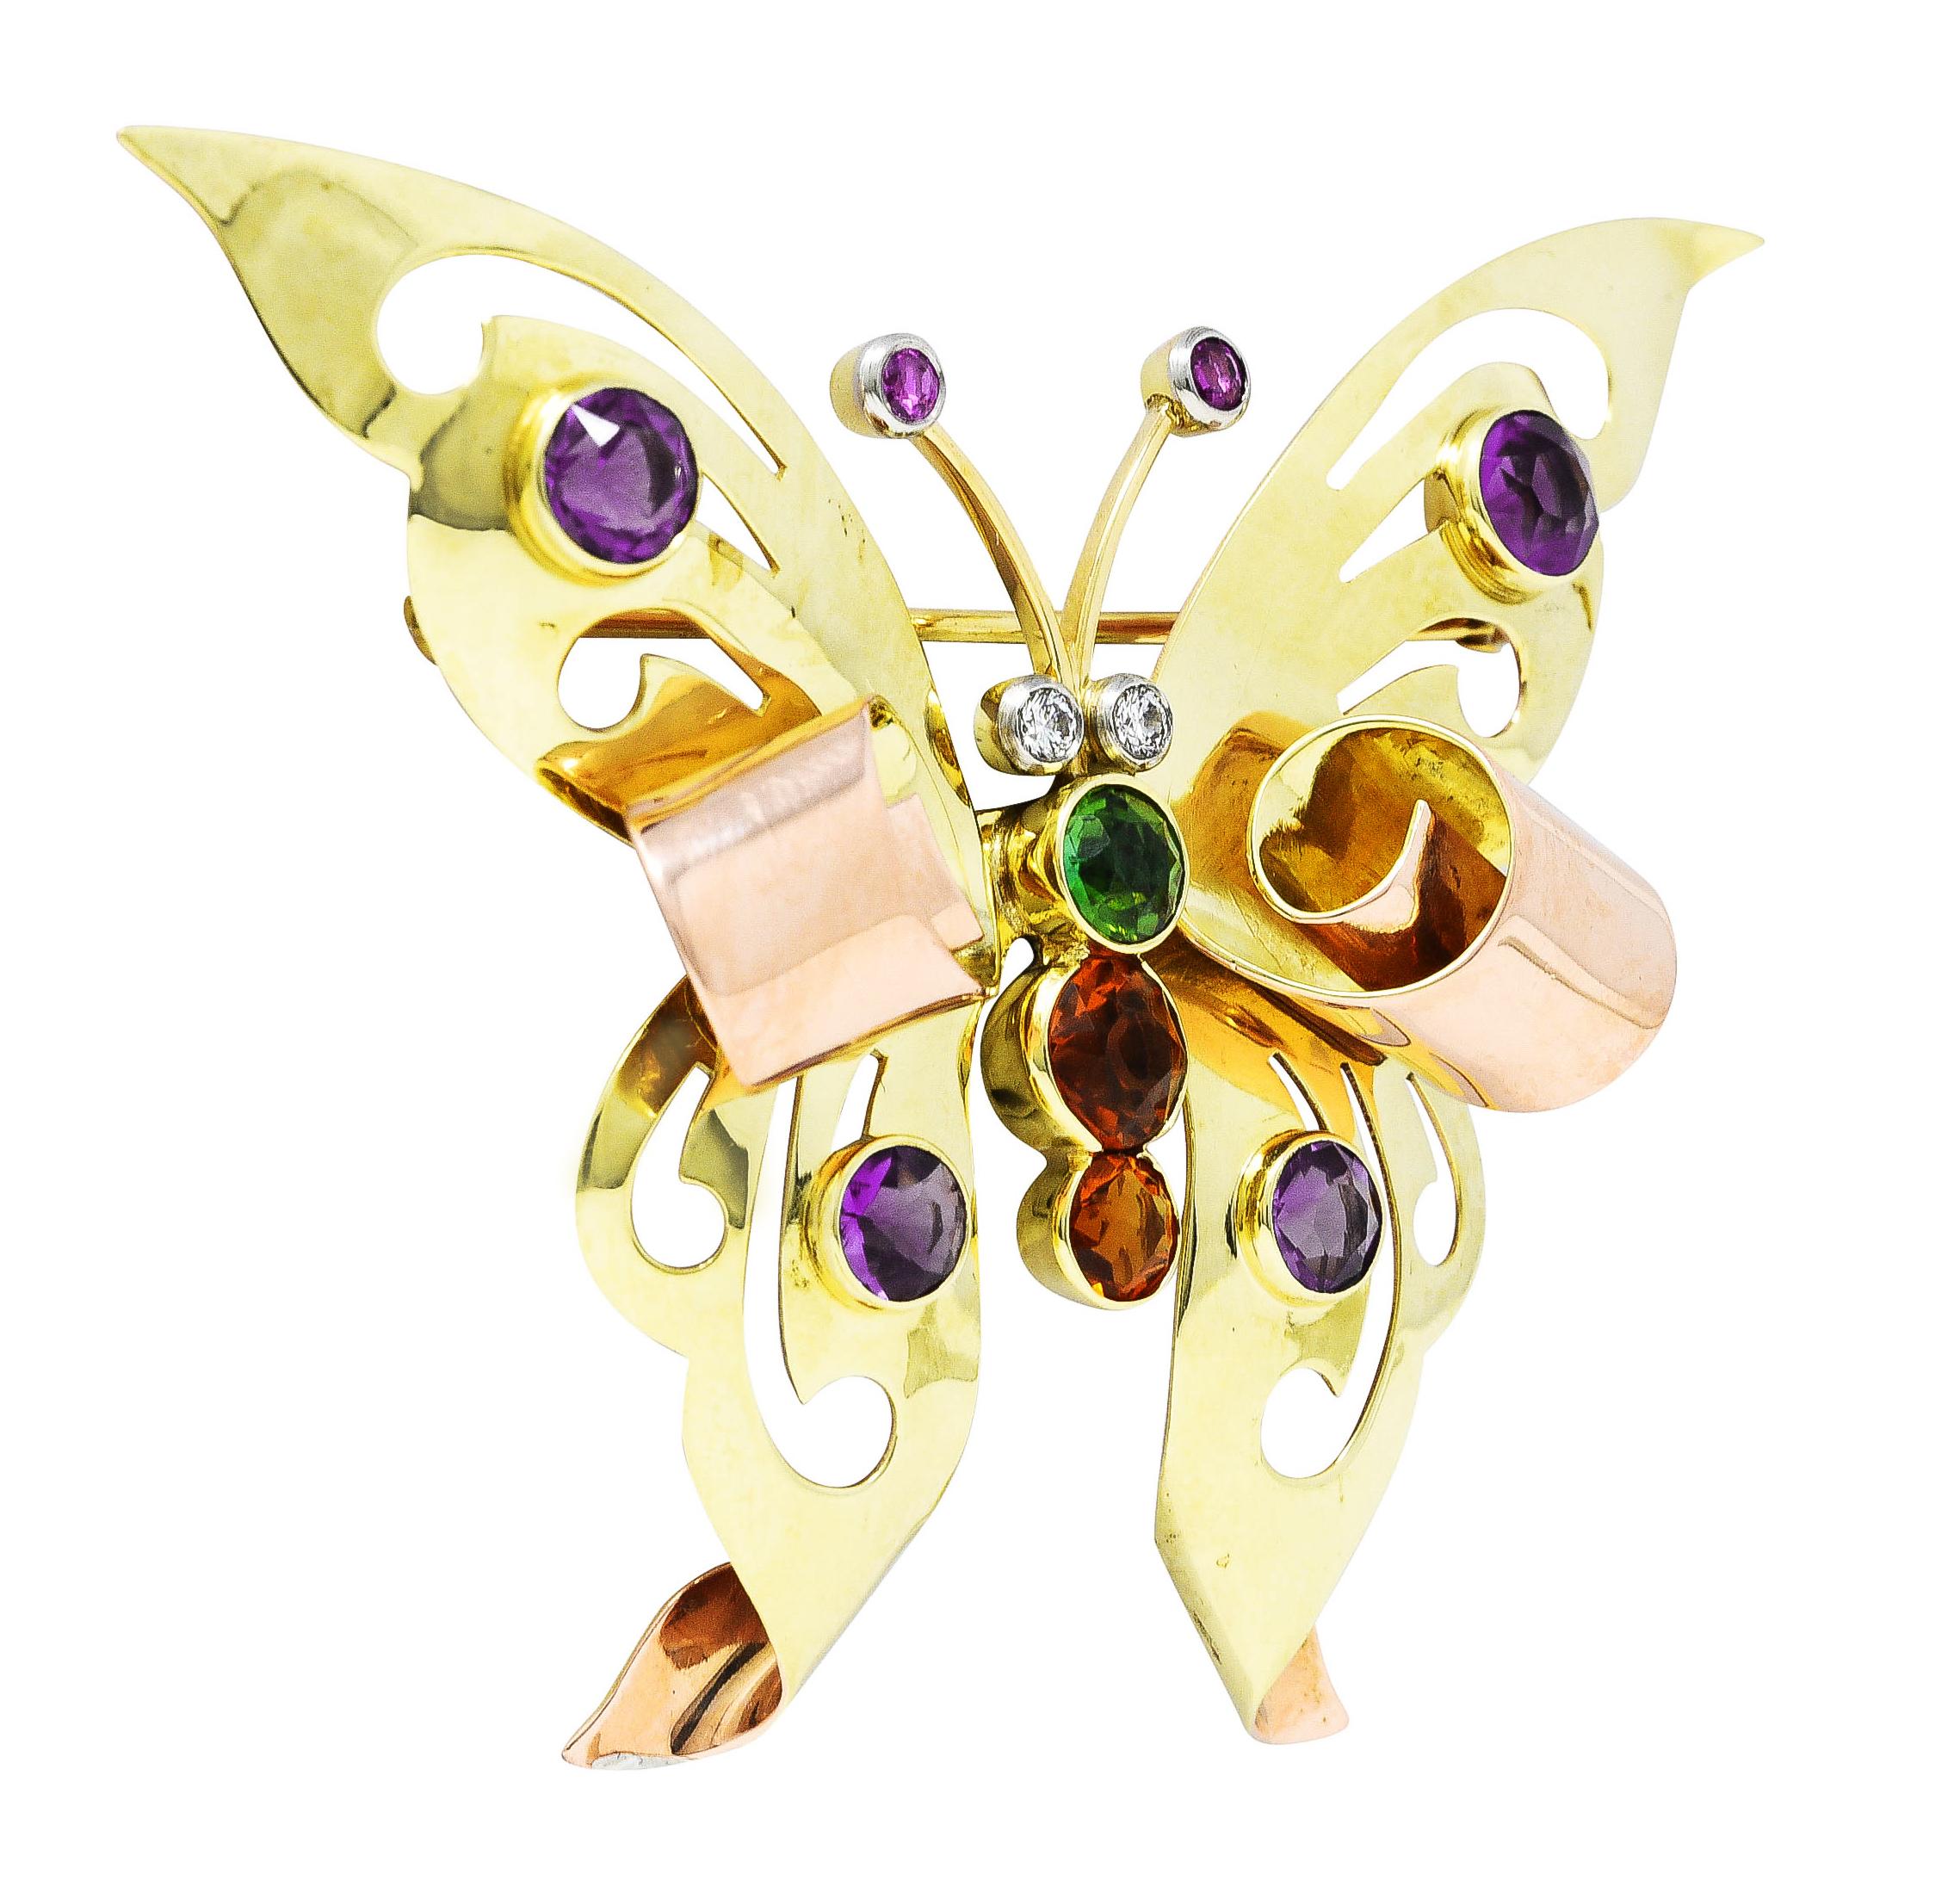 Brooch is designed as a butterfly with pierced yellow gold wings with scrolling rose gold tips- accented by amethyst. Bezel set round cut and ranging in size - transparent reddish-purple in color with medium saturation. Body is comprised of bezel